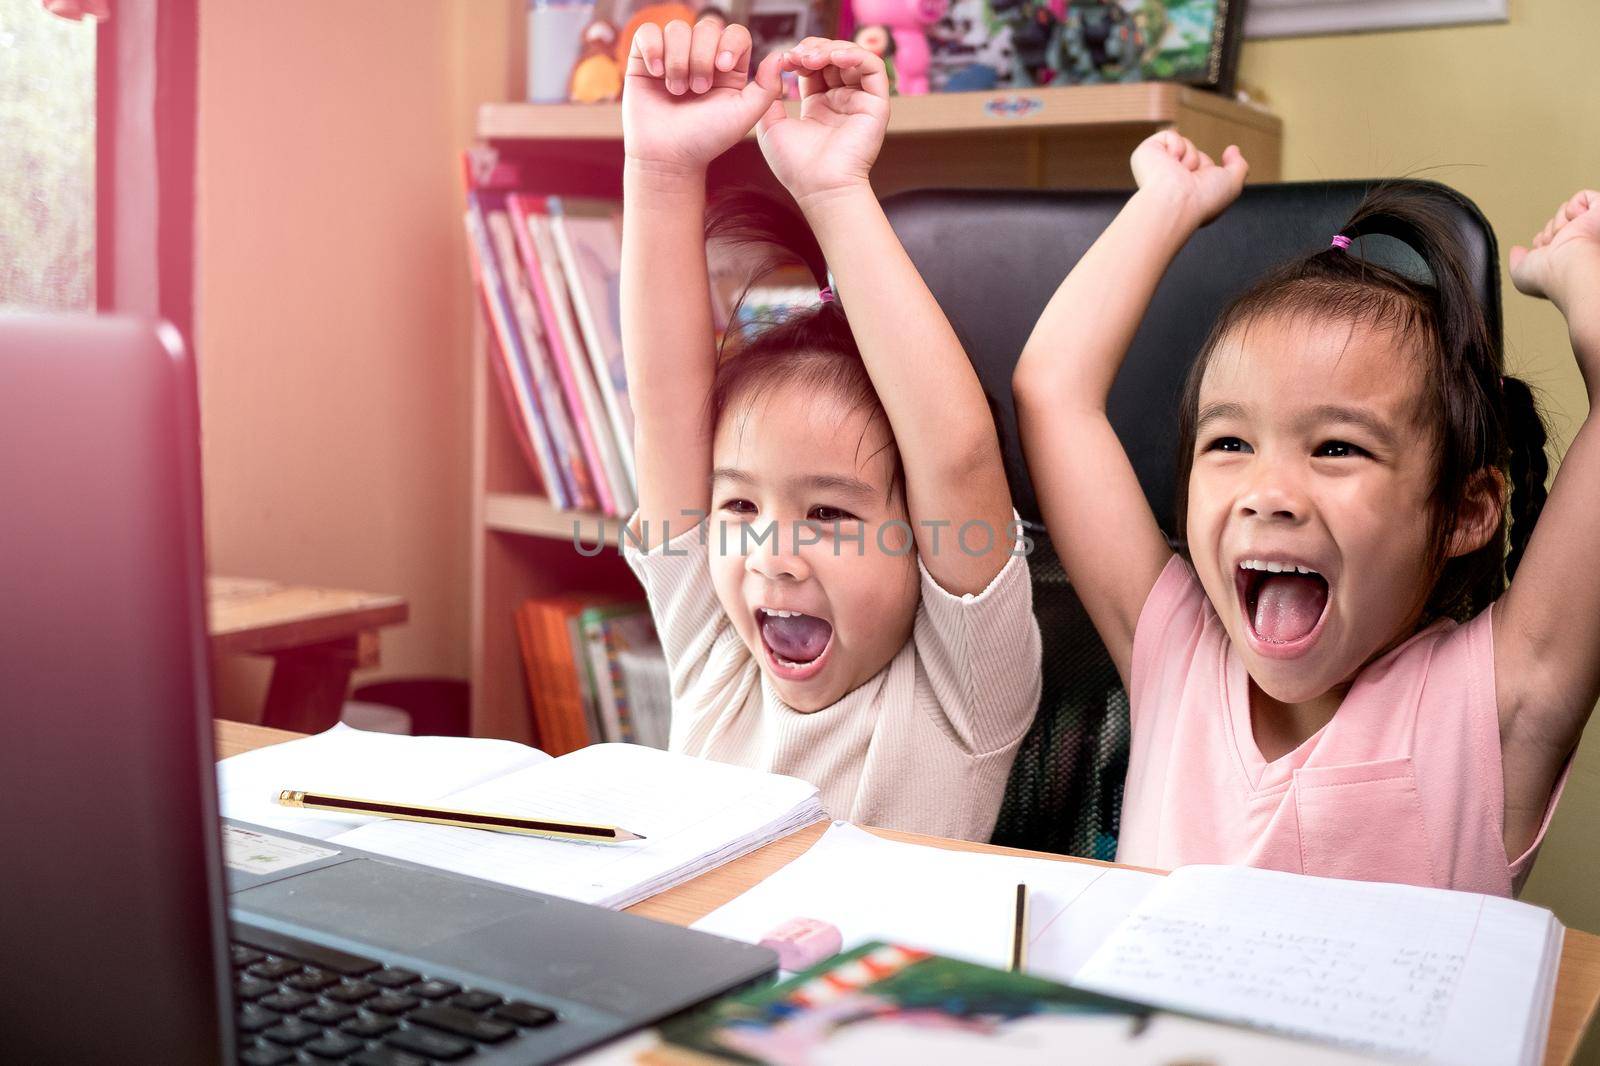 Two little schoolgirls studying homework math during her online lesson at home, social distancing during the coronavirus outbreak. Concept of online education or home schooler.